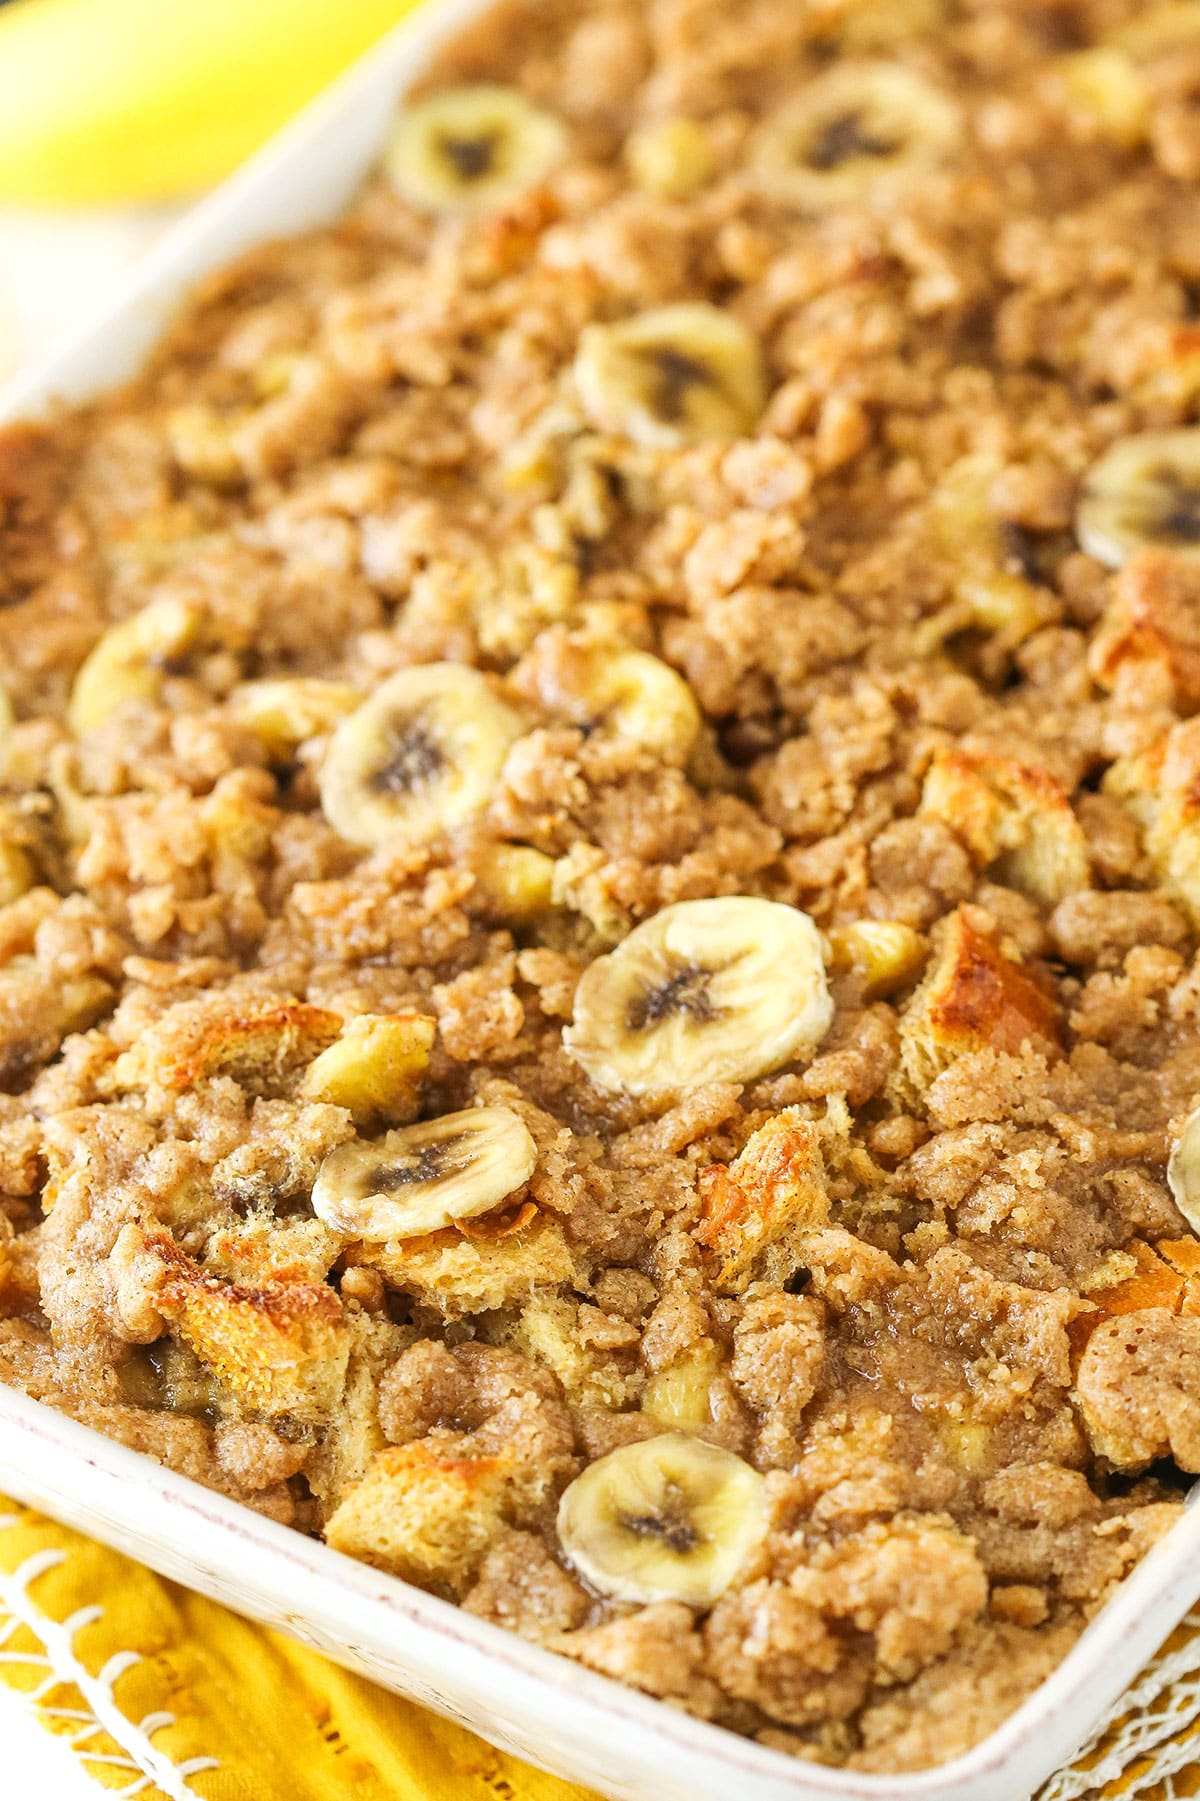 Overnight Baked Banana French Toast Casserole in a white serving tray